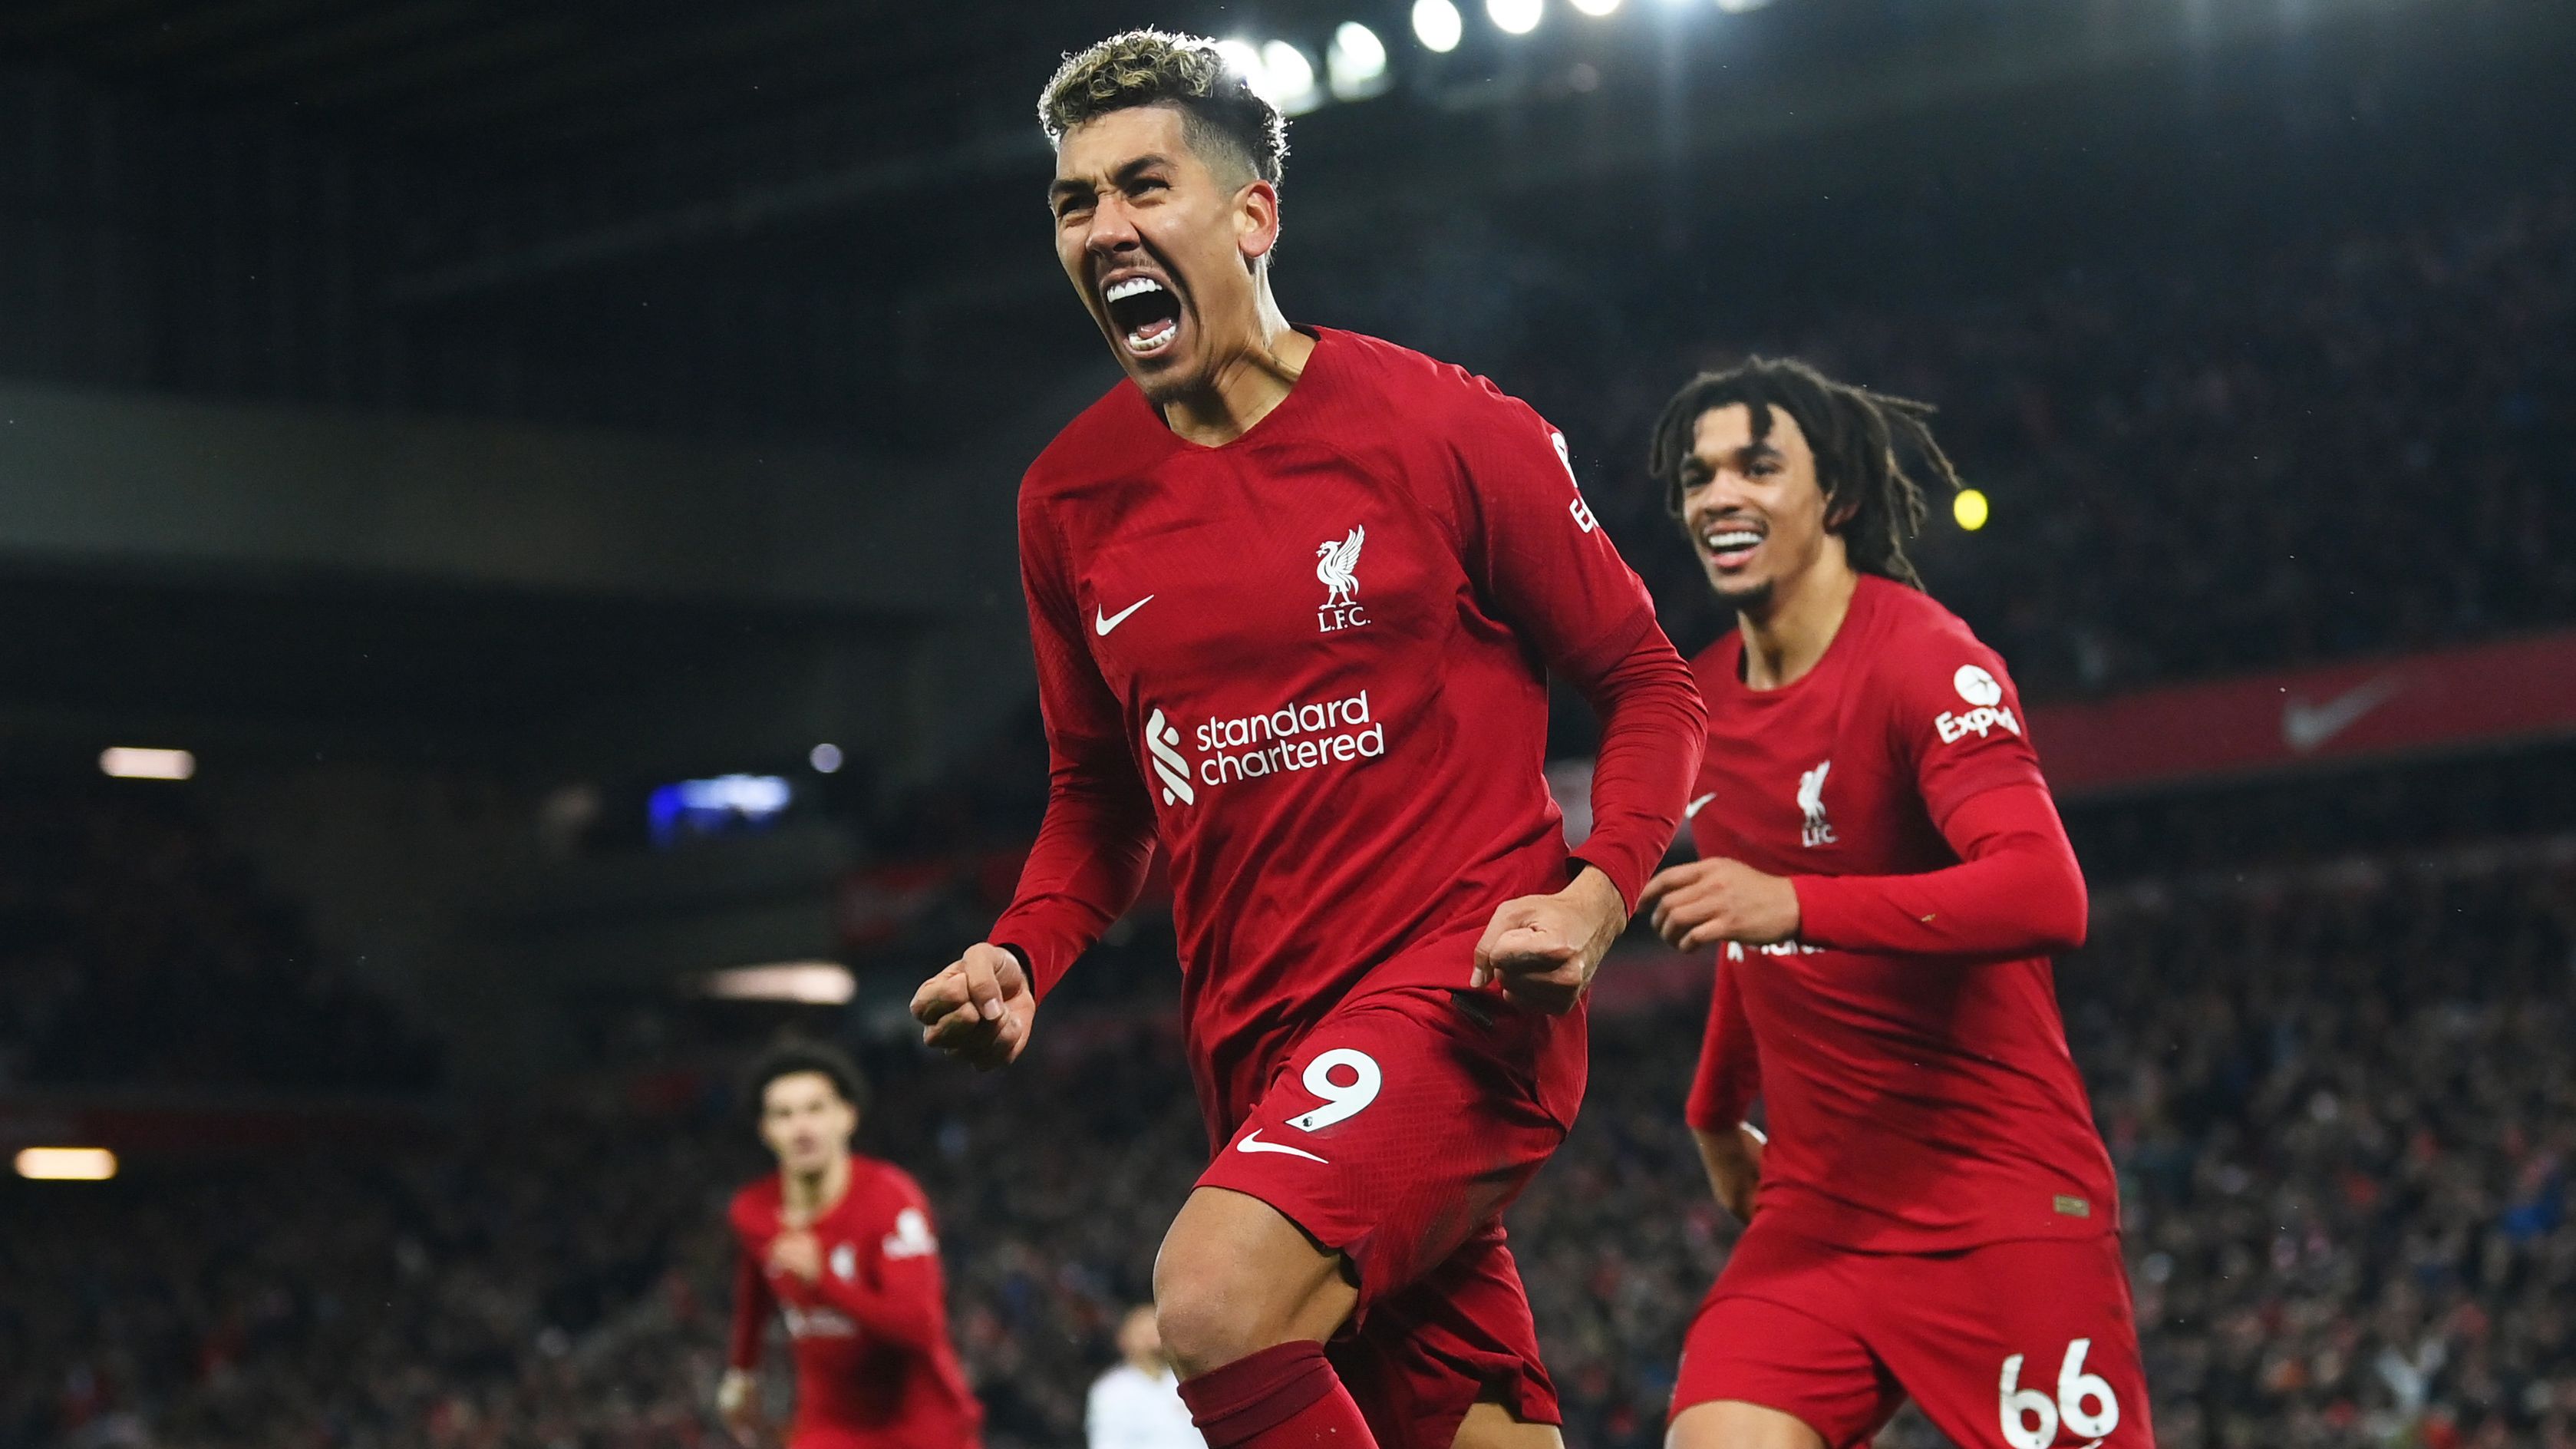 Liverpool humiliates Manchester United with 7-0 rout in English Premier League